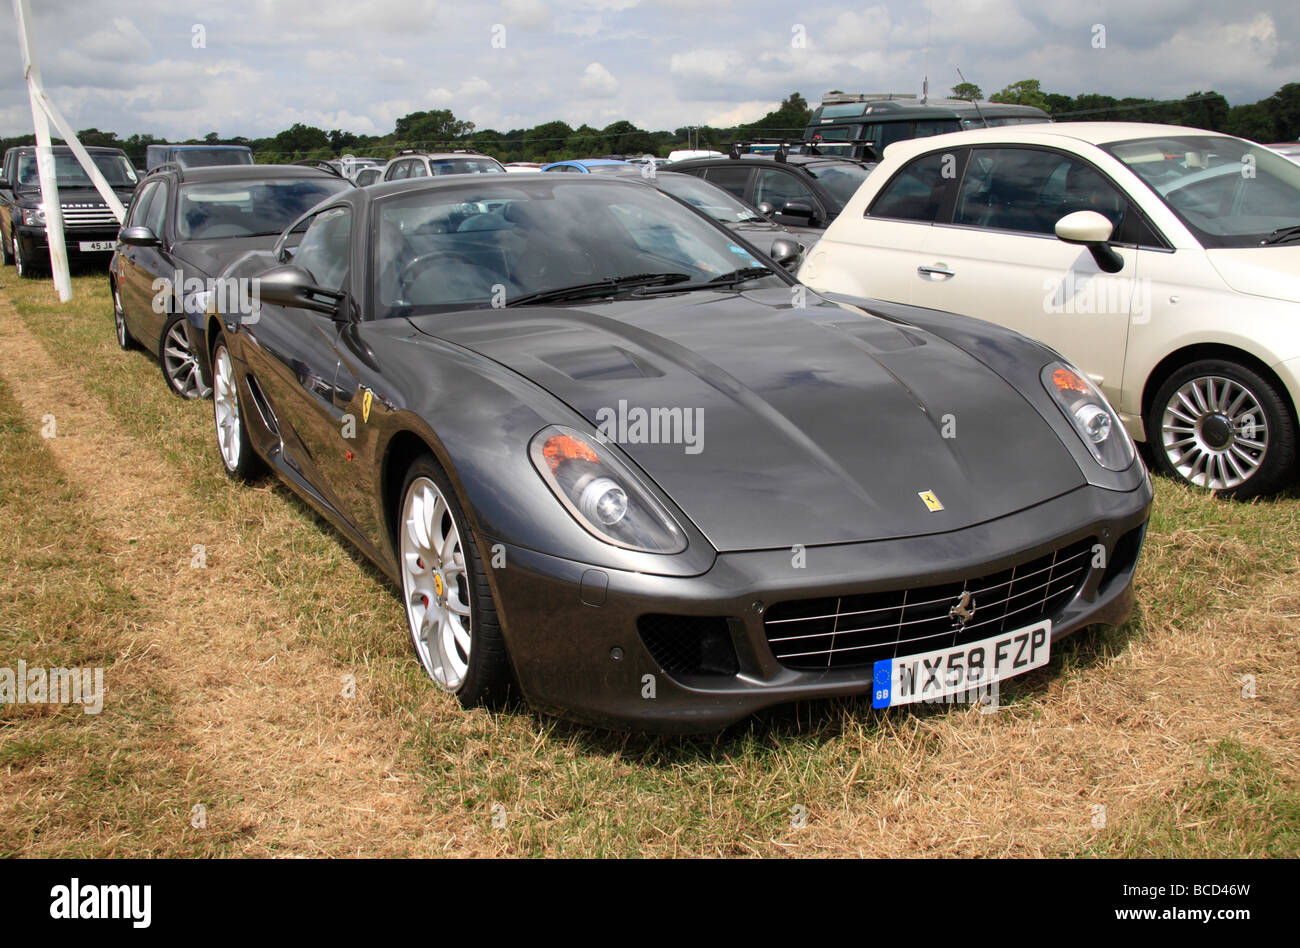 A 599 GTB Fiorano in the public car park at the Goodwood Festival of Speed, July 2009. Stock Photo